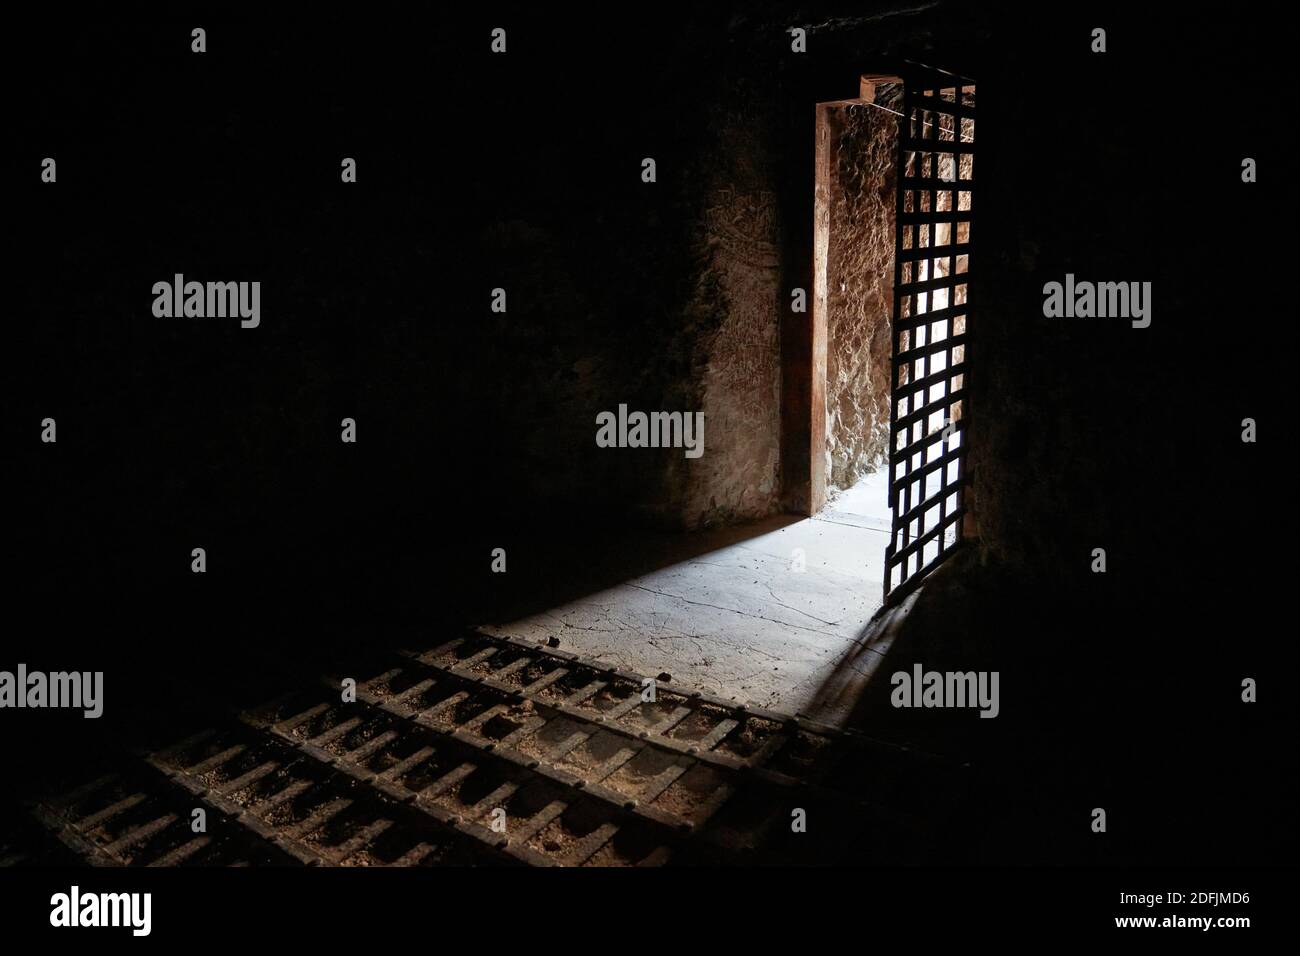 Light shining through the doorway in a solitary confinement cell in Yuma territorial prison, Yuma, Arizona Stock Photo